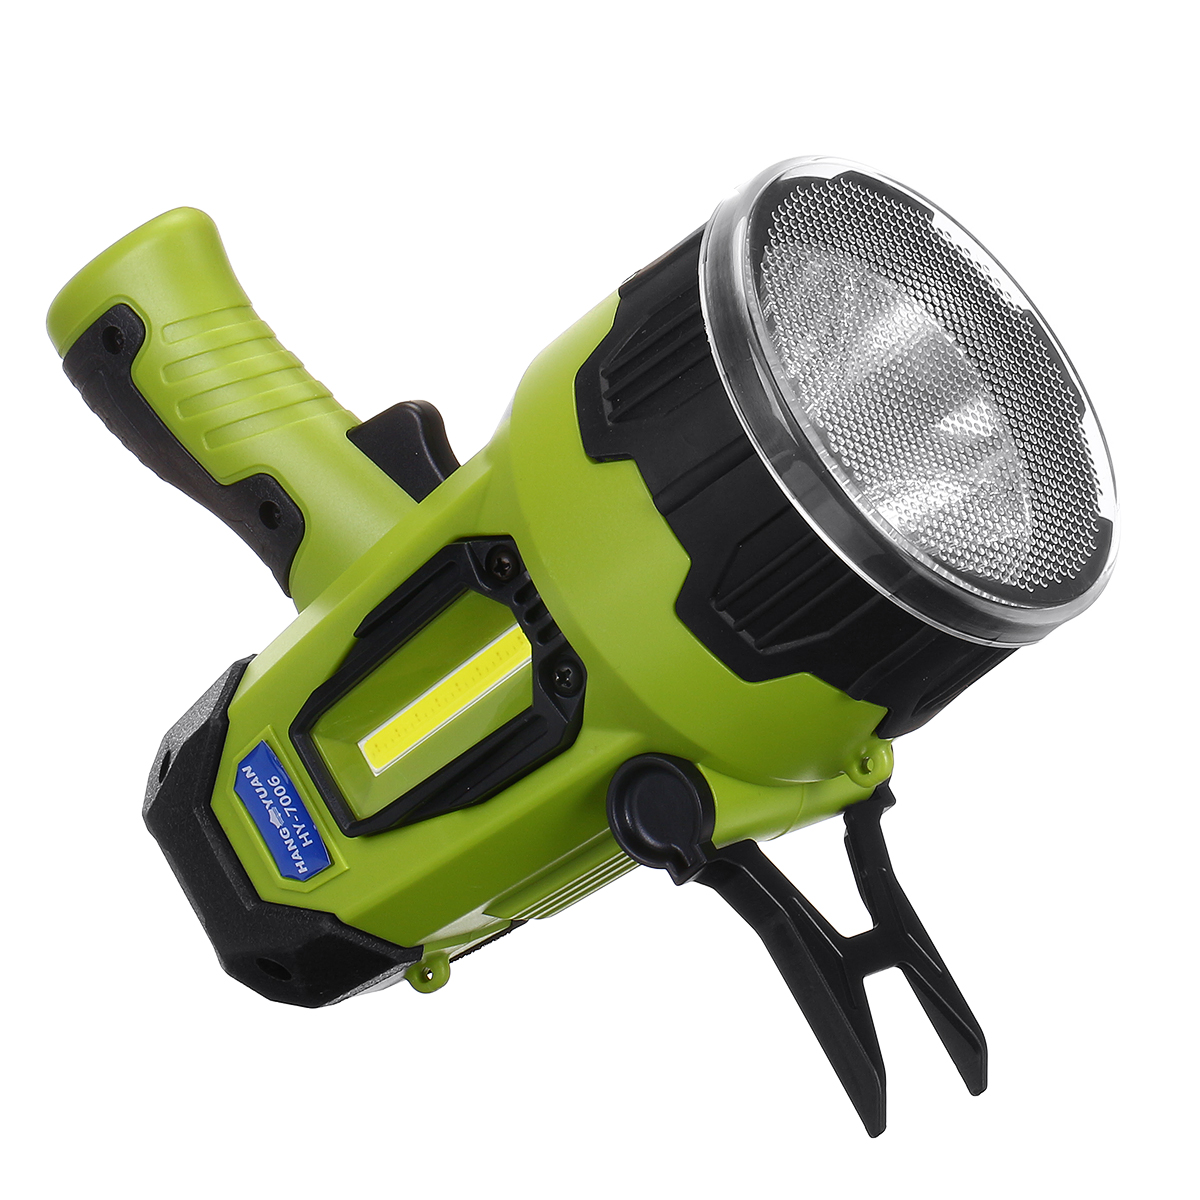 Rechargeable spotlight, Spot lights hand held large flashlight 5000 lumens handheld spotlight Lightweight and Super bright flashlight, for fishing and hunting, forestry, adventure - image 4 of 7